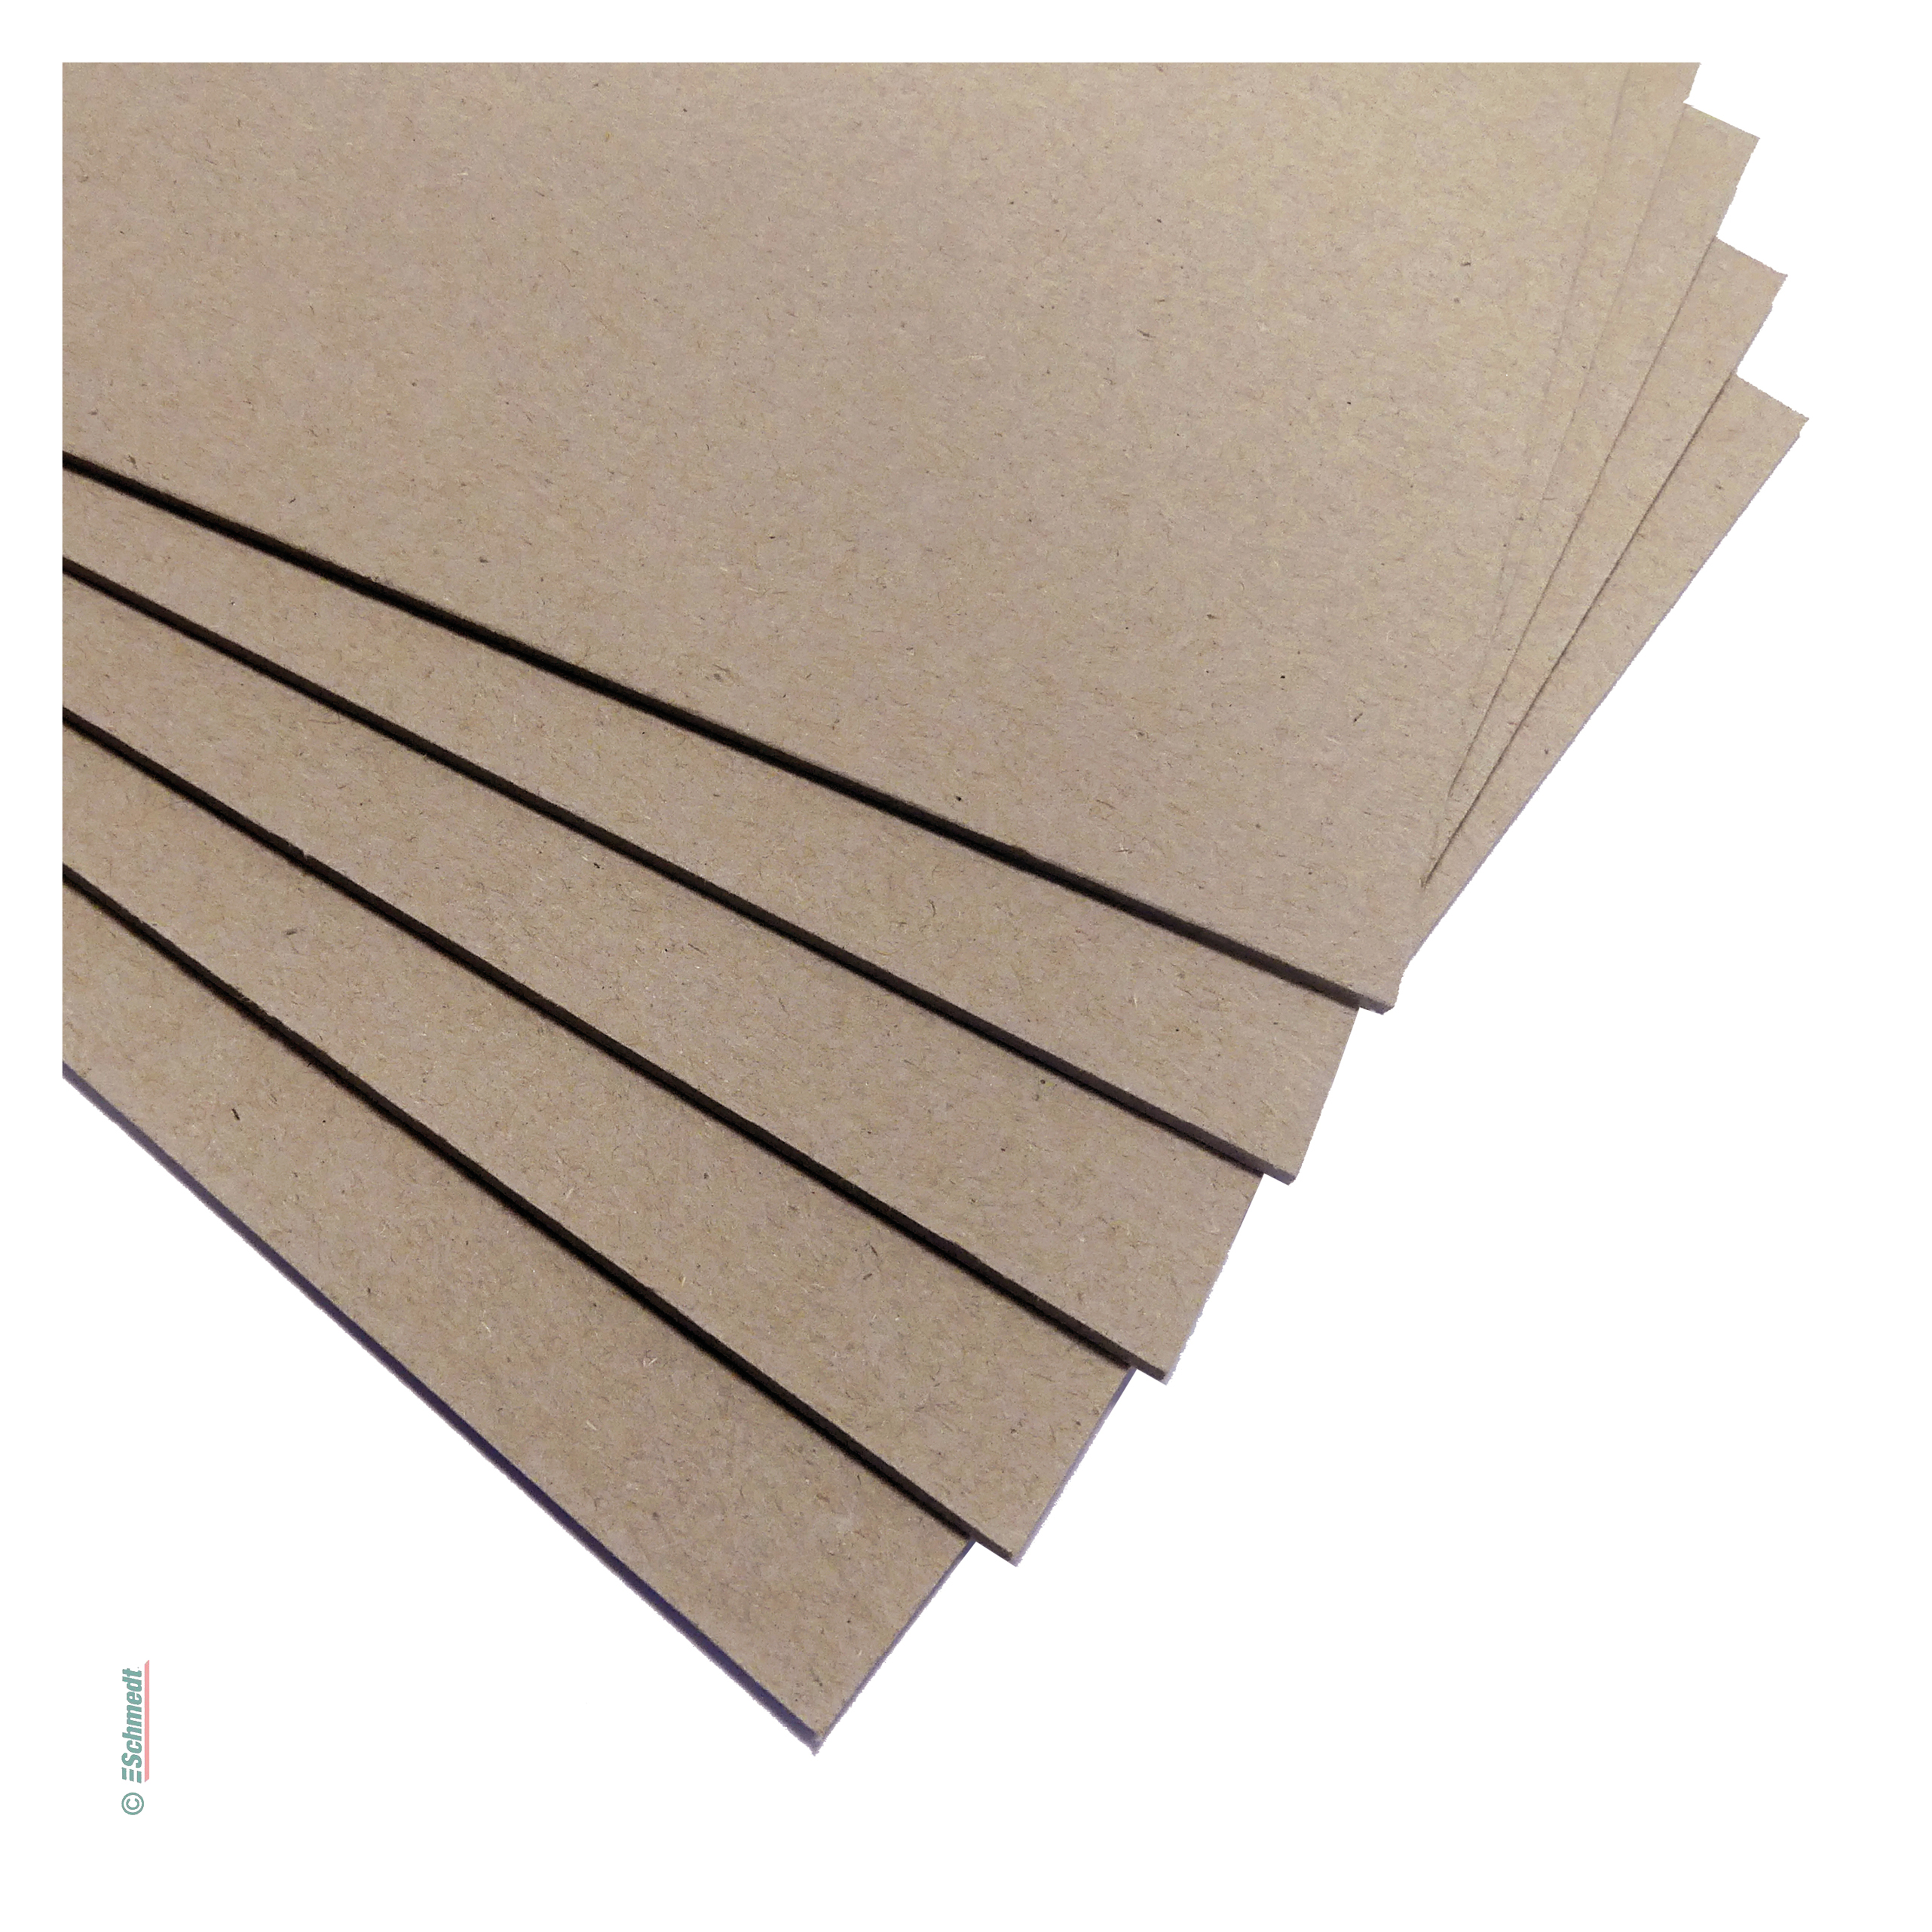 Pre-cut board sheets in DIN sizes - made of bookbinder's grey board -  Thickness: 2.0 mm - » Packet of 20 pieces

» smooth surface on both... - image-1